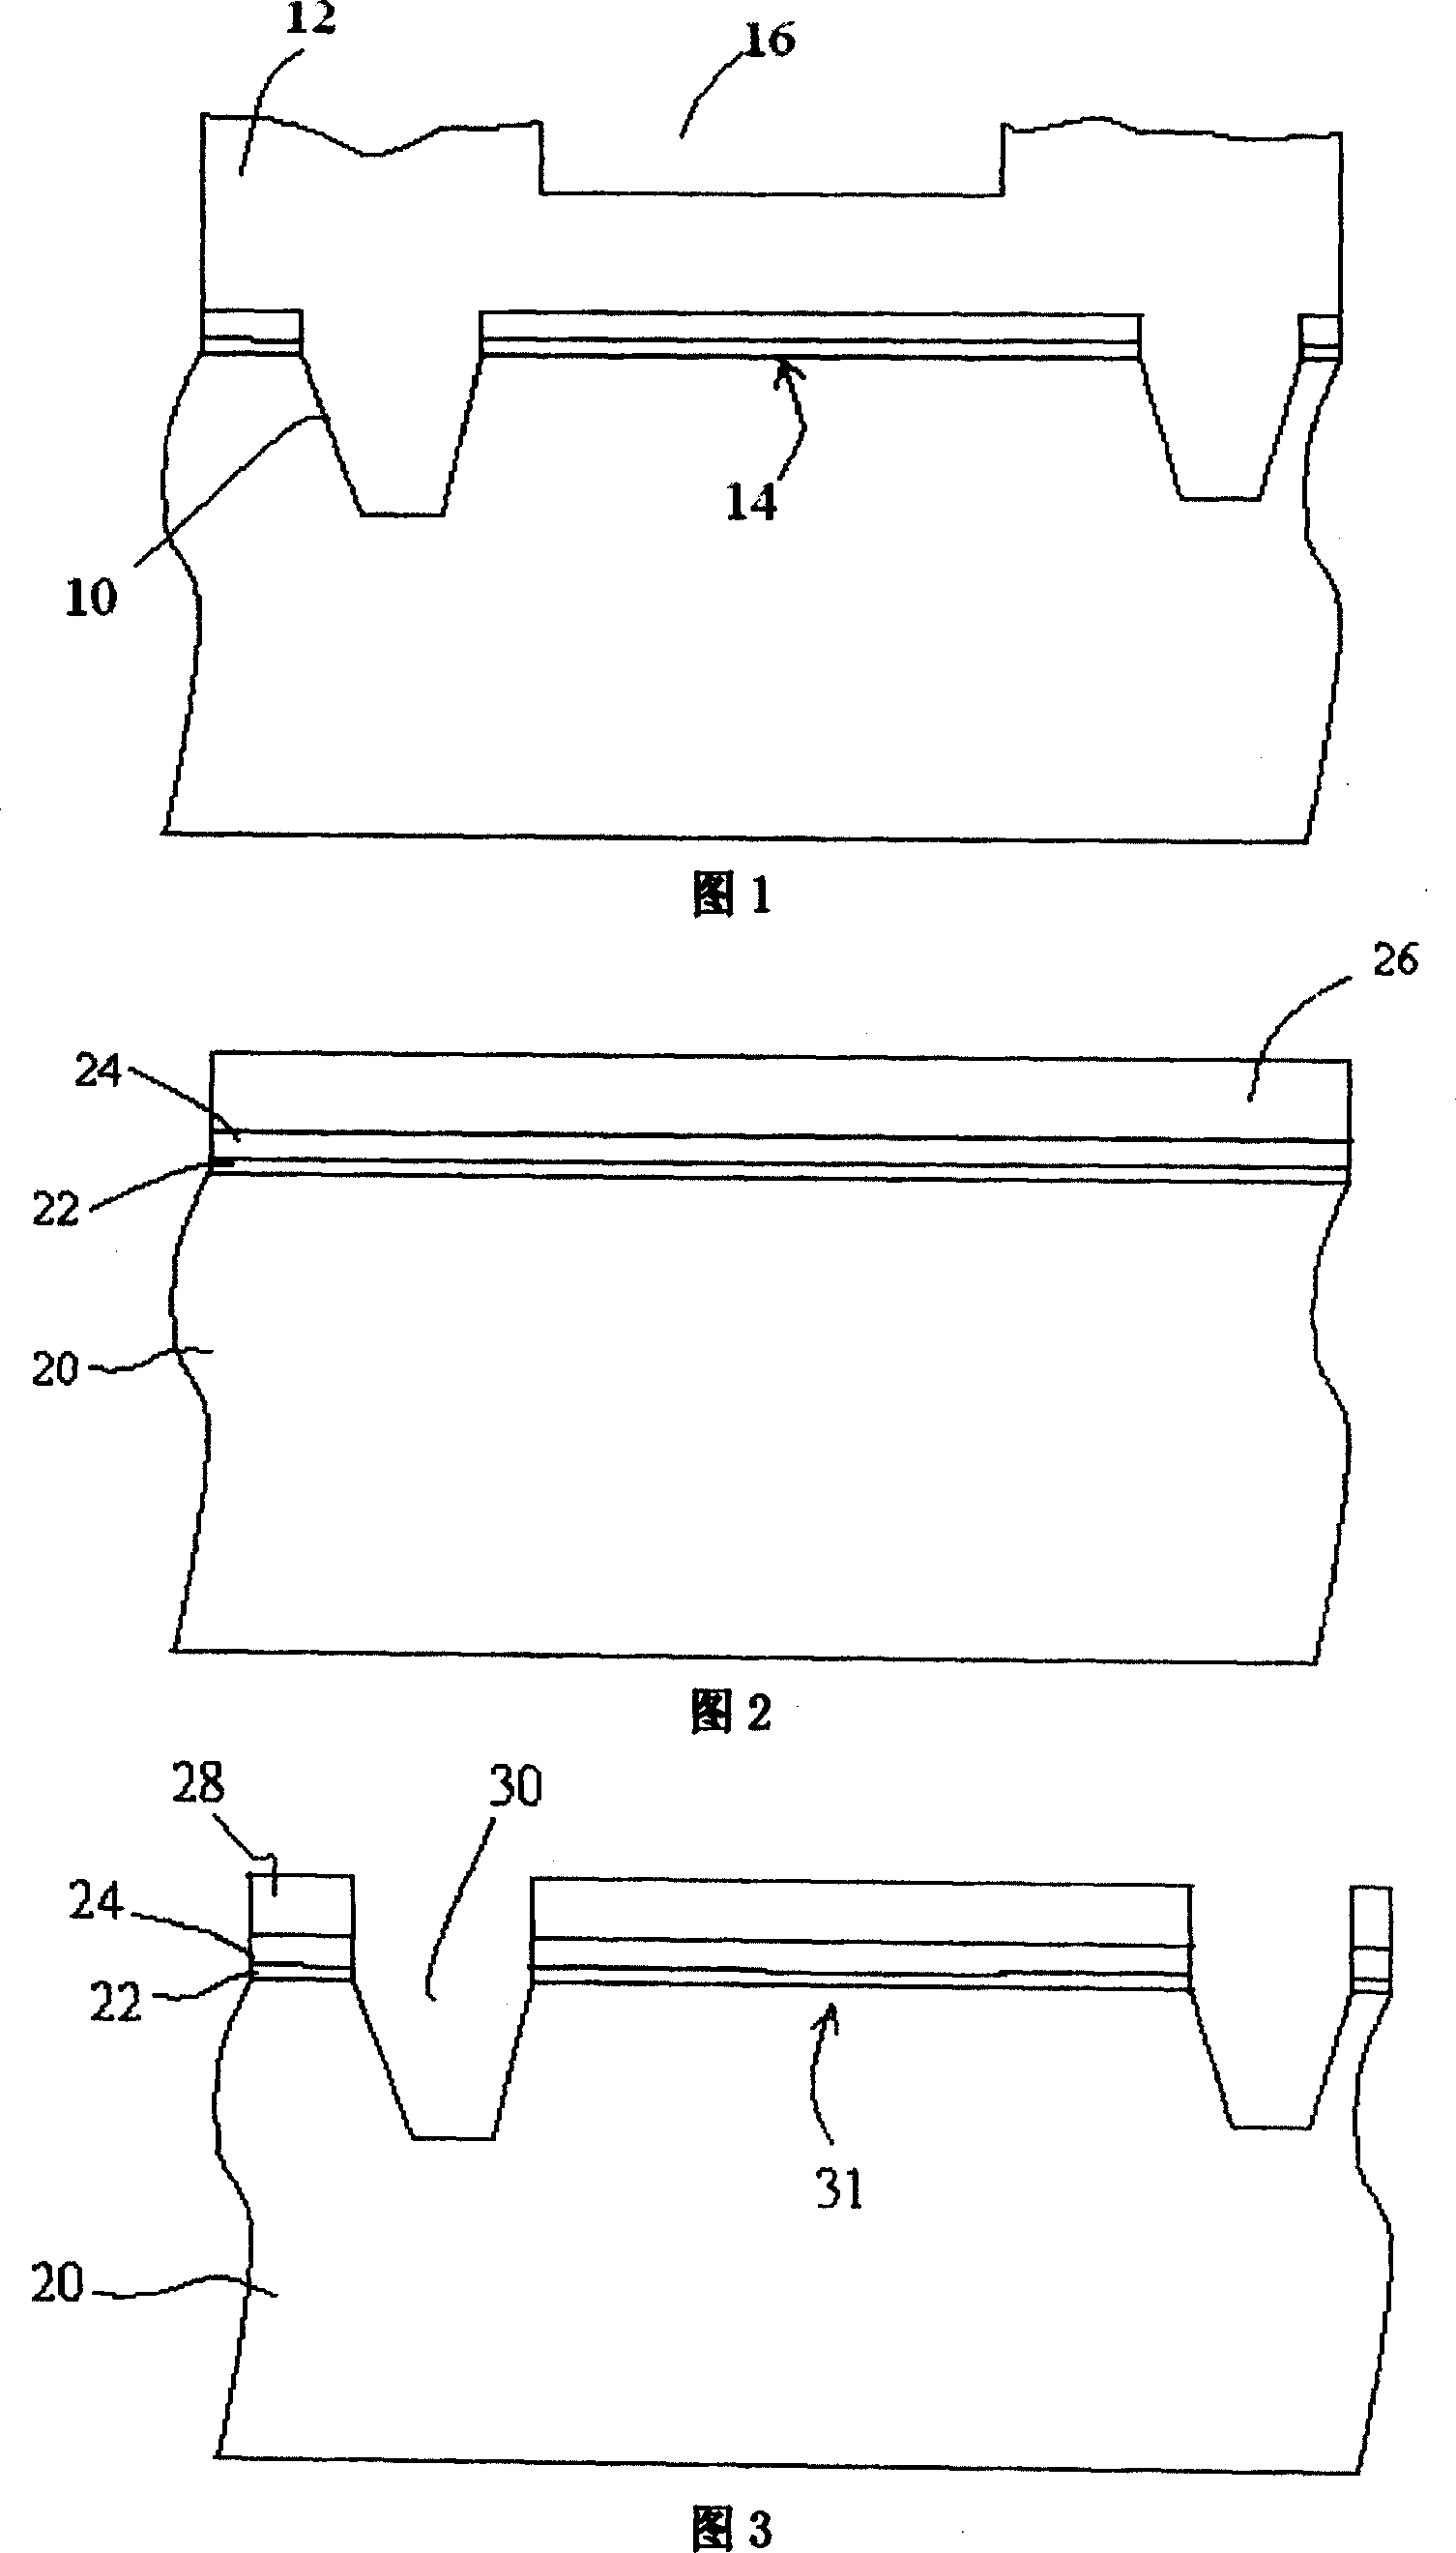 Improvement for shallow slot separated structure height homogeneity